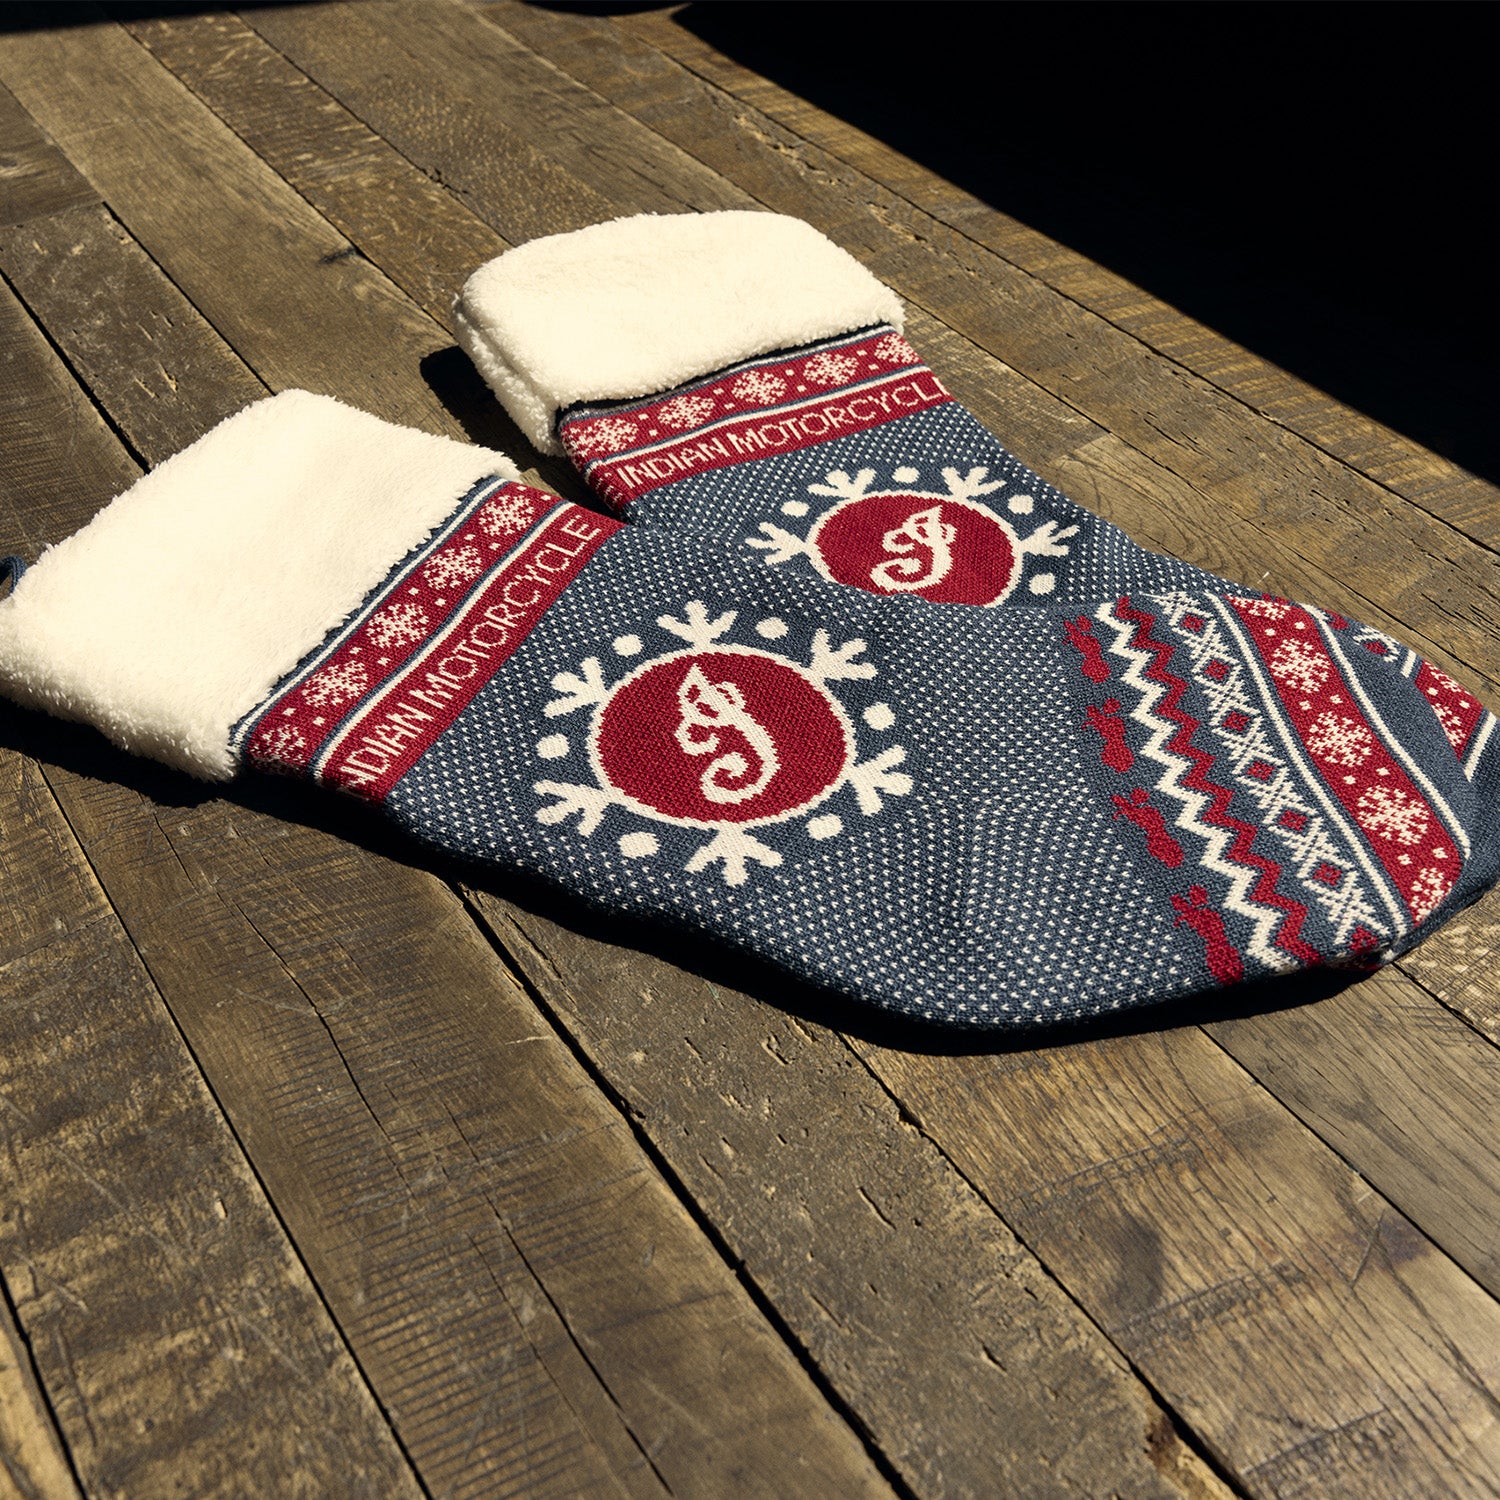 IMR Exclusive Holiday Stocking Set, Navy